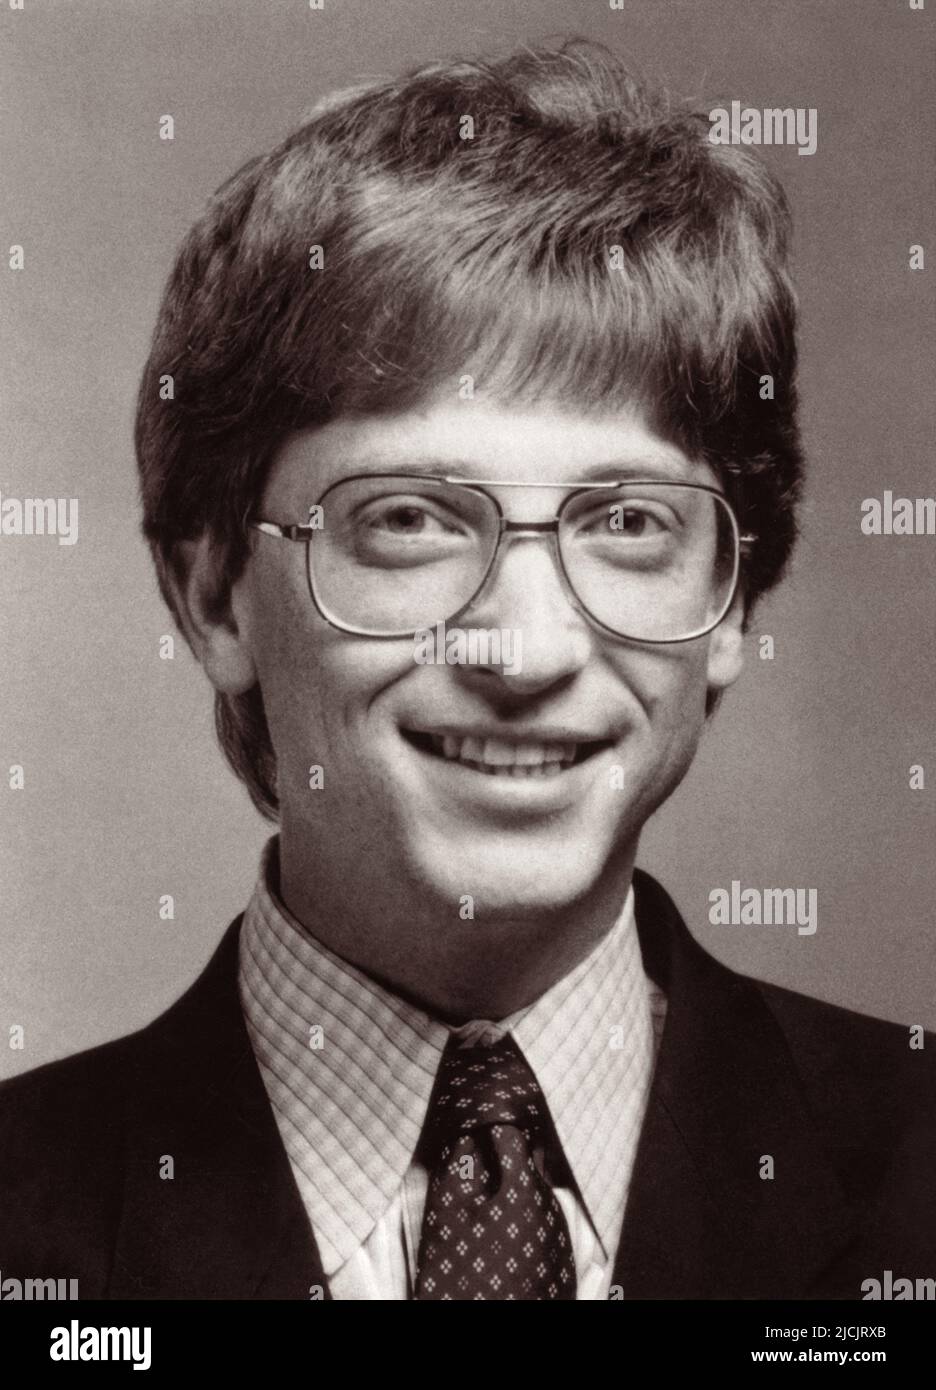 Young Bill Gates, software developer, president and CEO of Microsoft, in the 1980s. (USA) Stock Photo